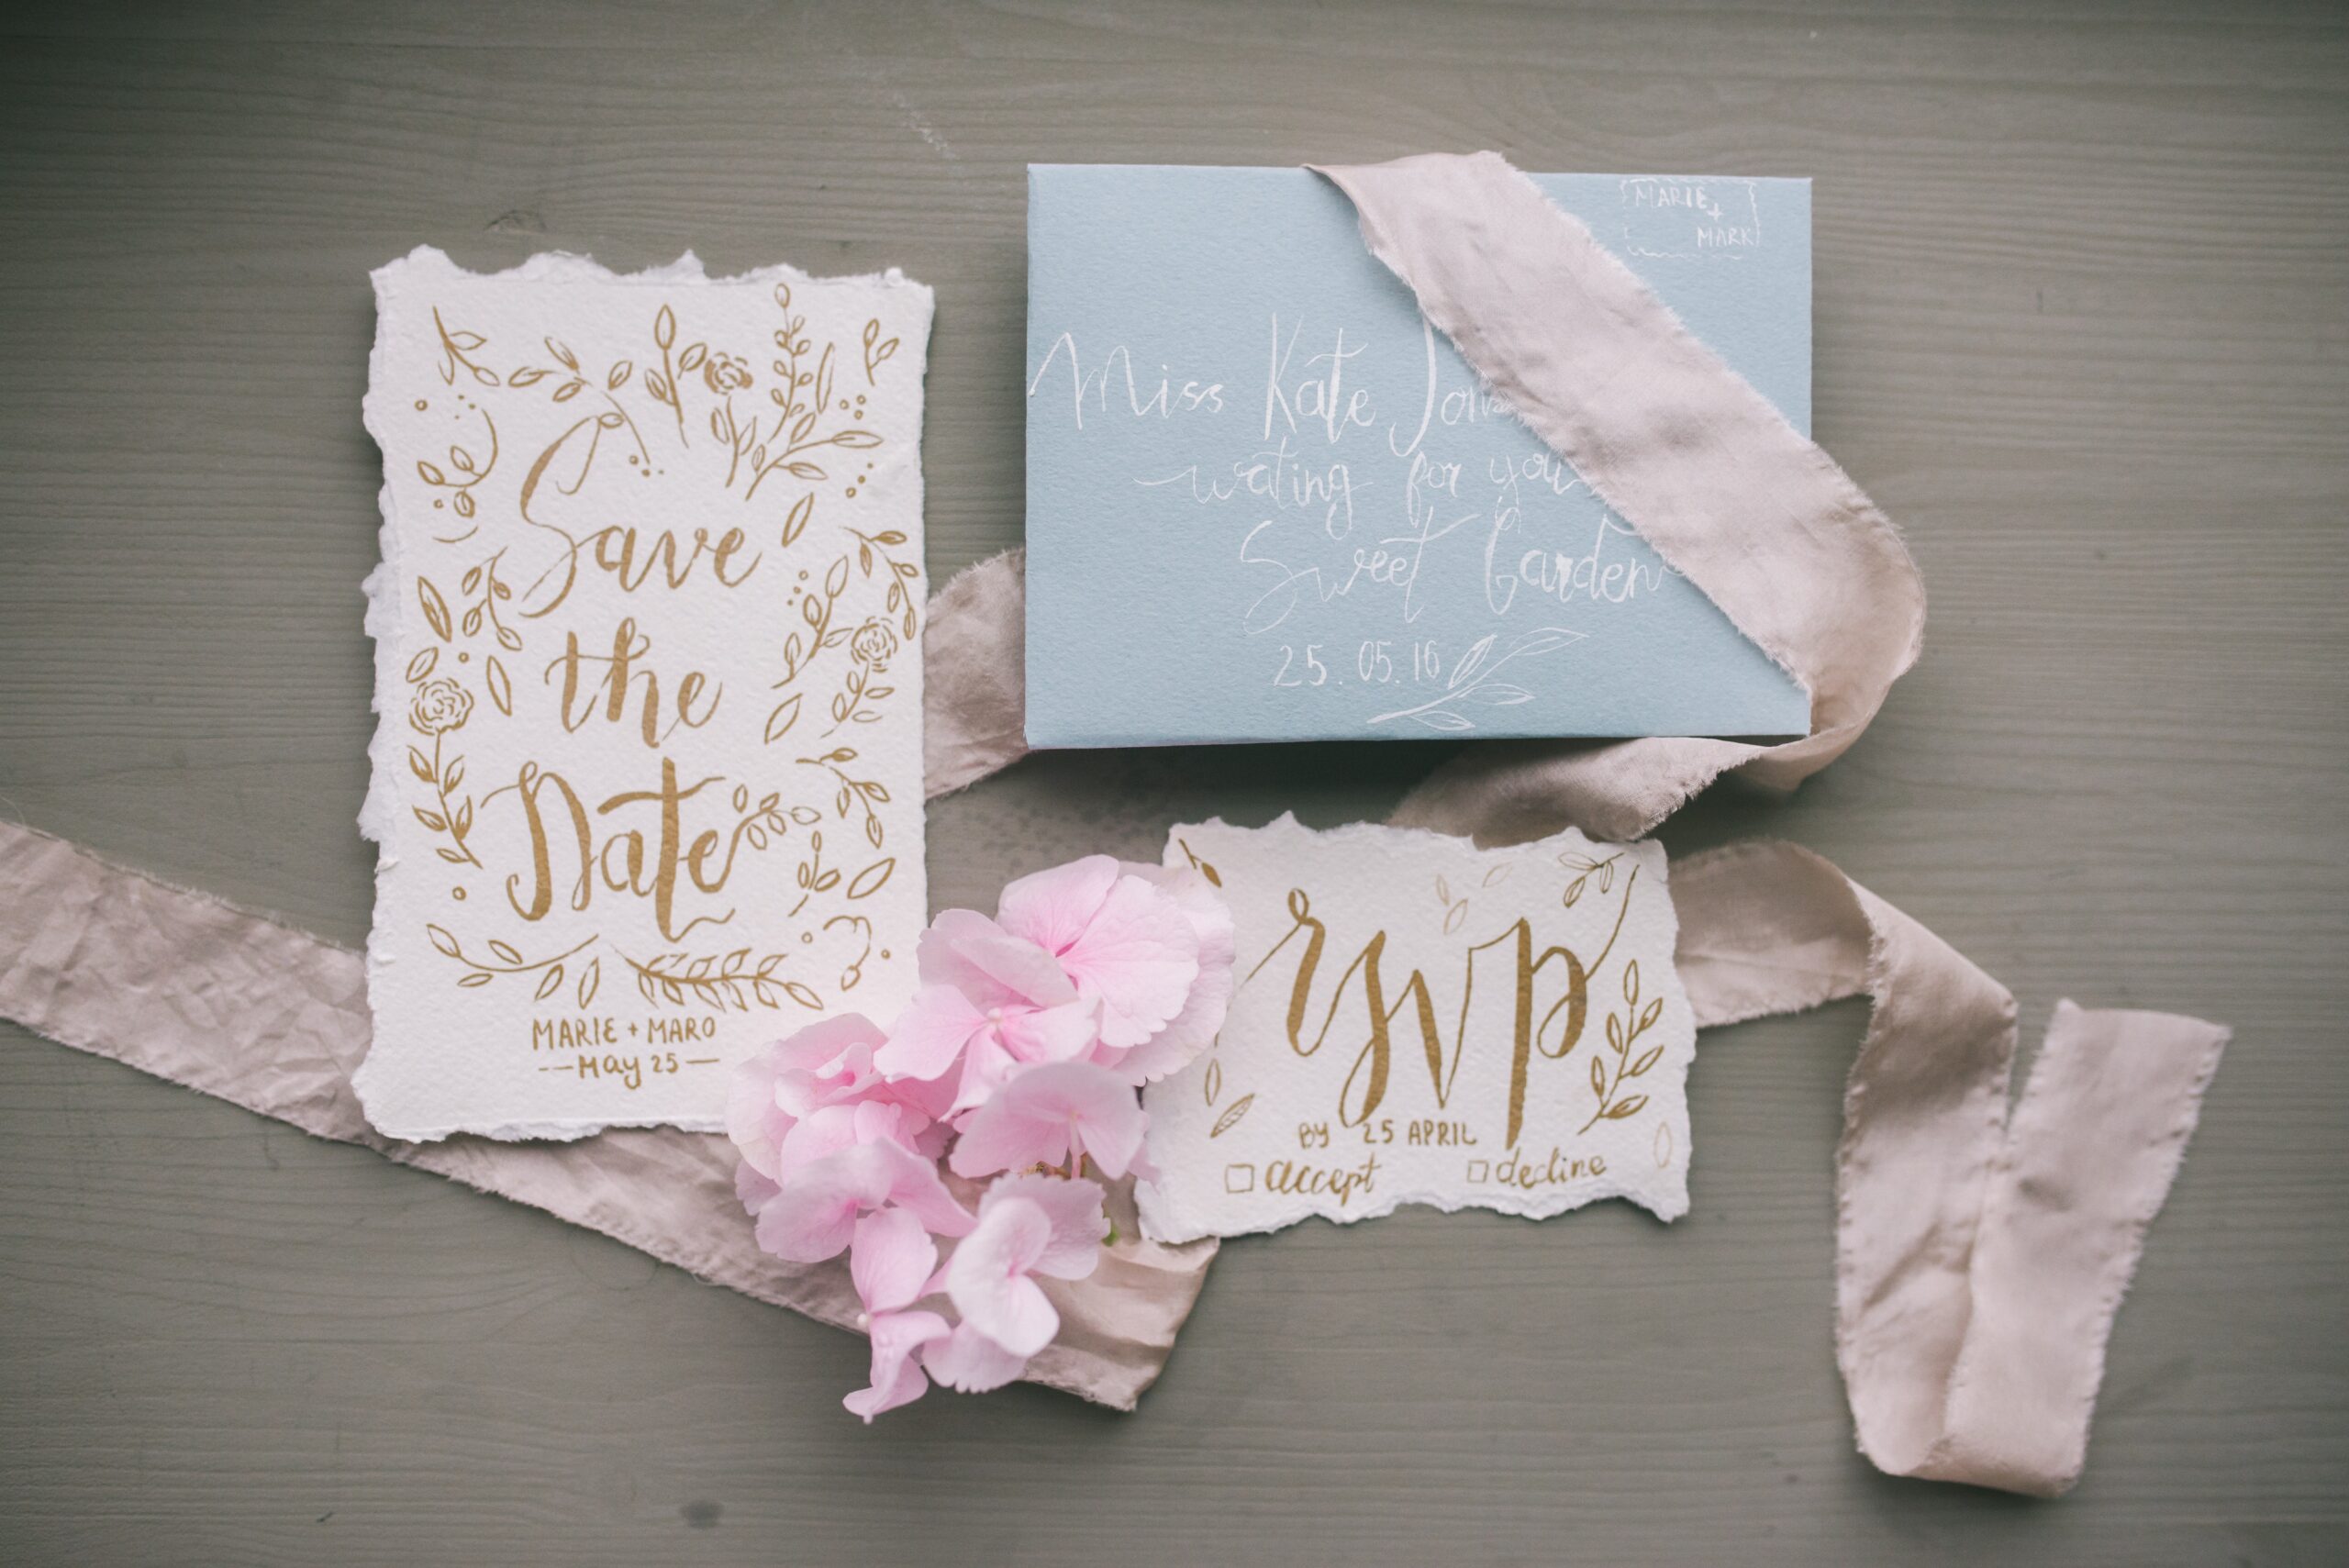  save the date invitations same-sex wedding couples